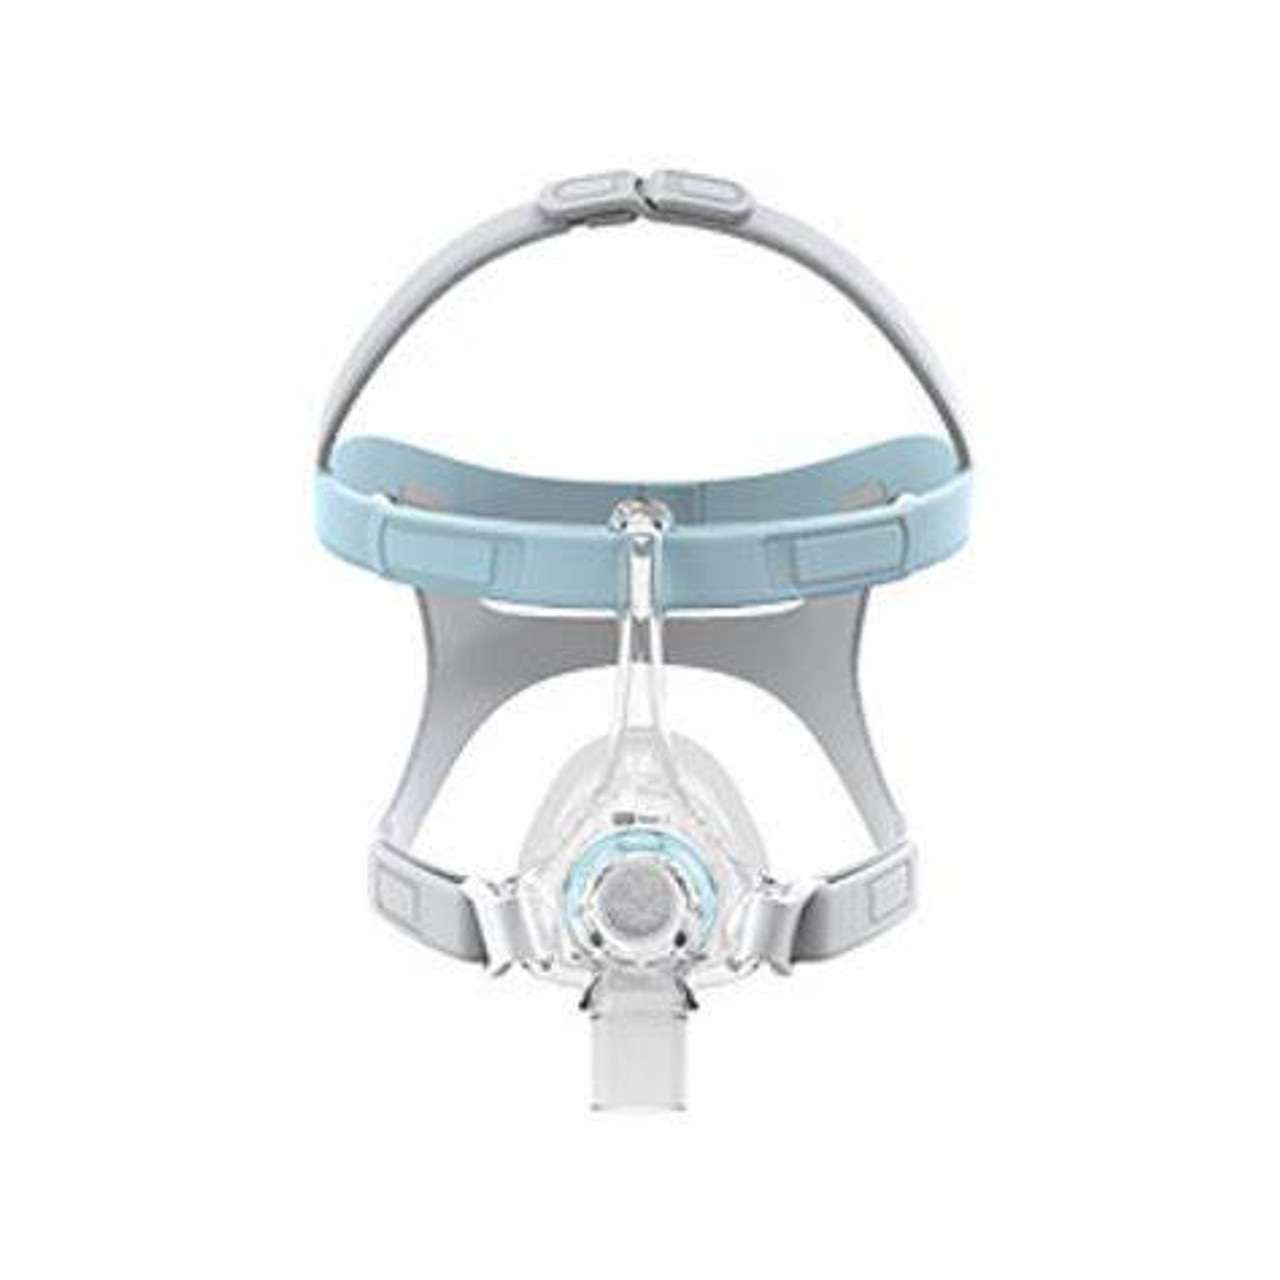 Buy Fisher and Paykel Eson 2 Nasal Interface Mask Online